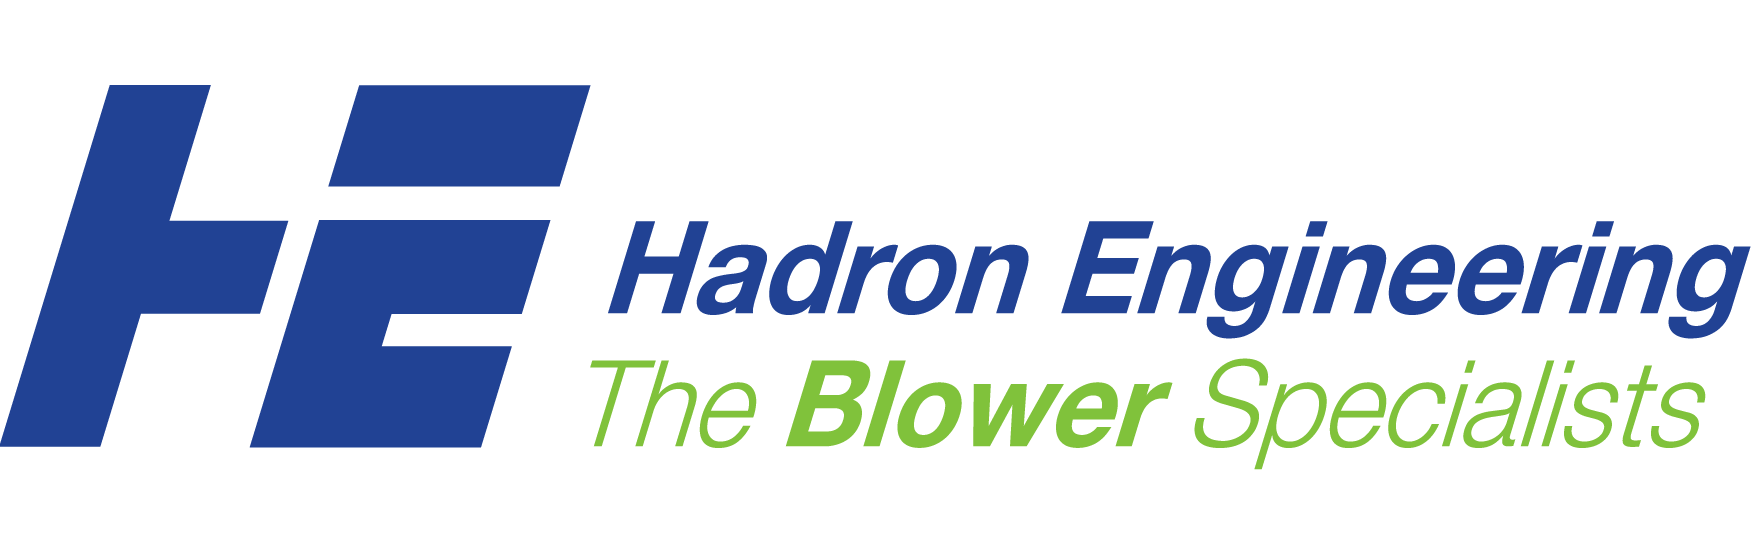 Hadron Engineering - The Blower Specialists